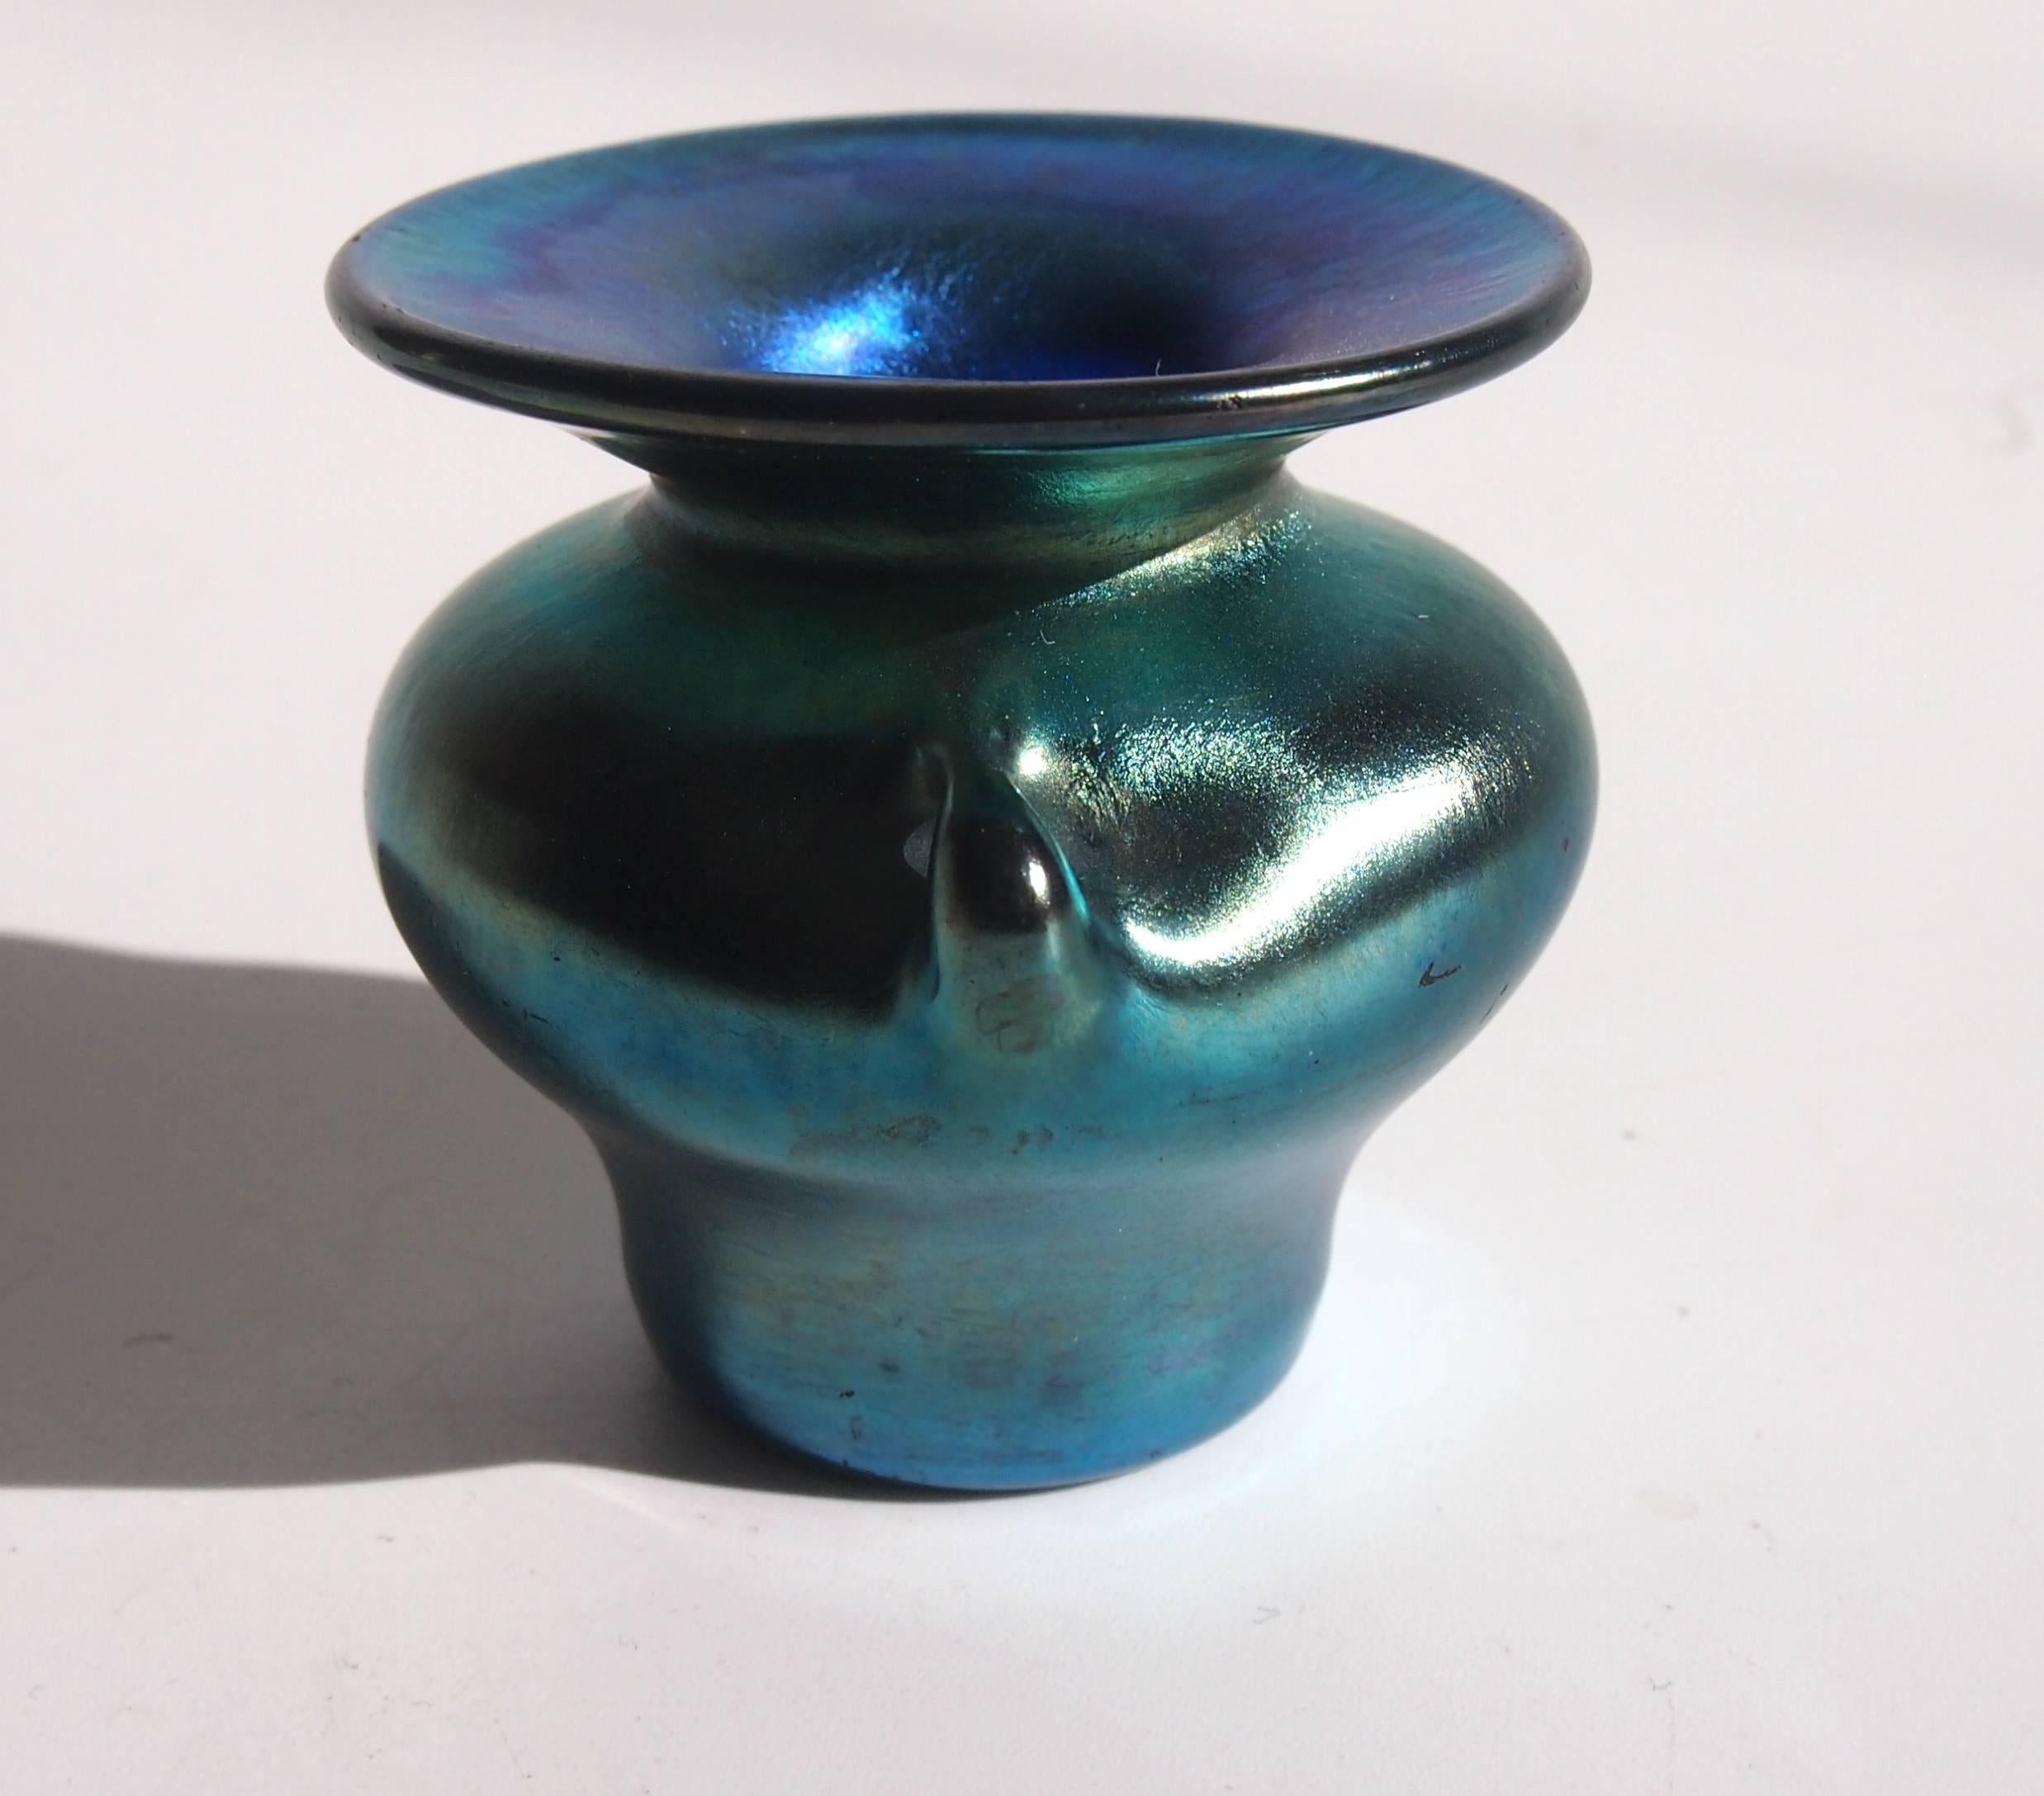 A very rare Louis Comfort Tiffany Art Nouveau blue Favrile miniature vase in the Art Nouveau style and shaped like a tiny Greek urn with two cute handles and flared opening top. The main body is a slightly greeny/gold blue and the flared opening is